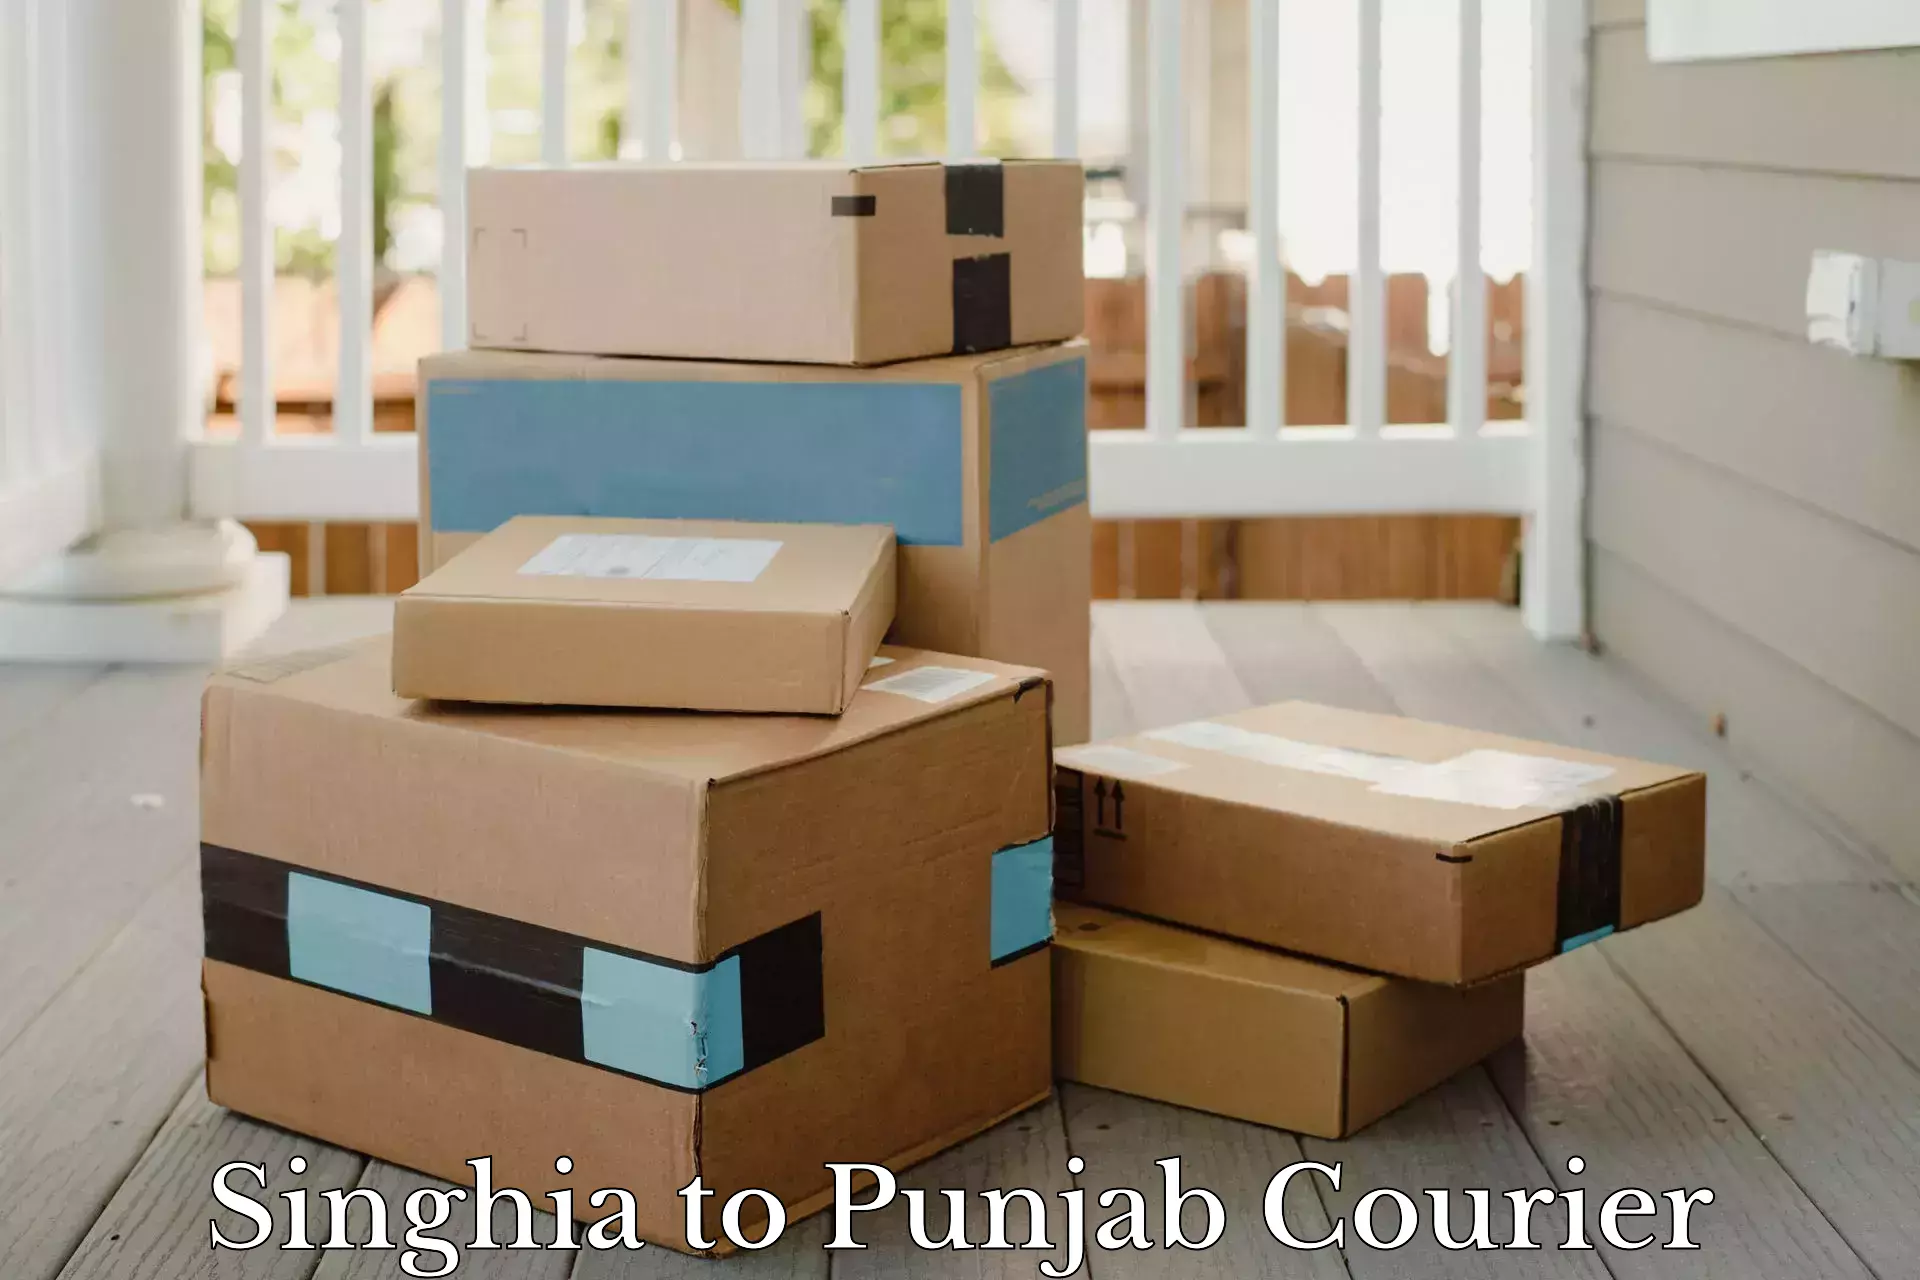 Business delivery service Singhia to Punjab